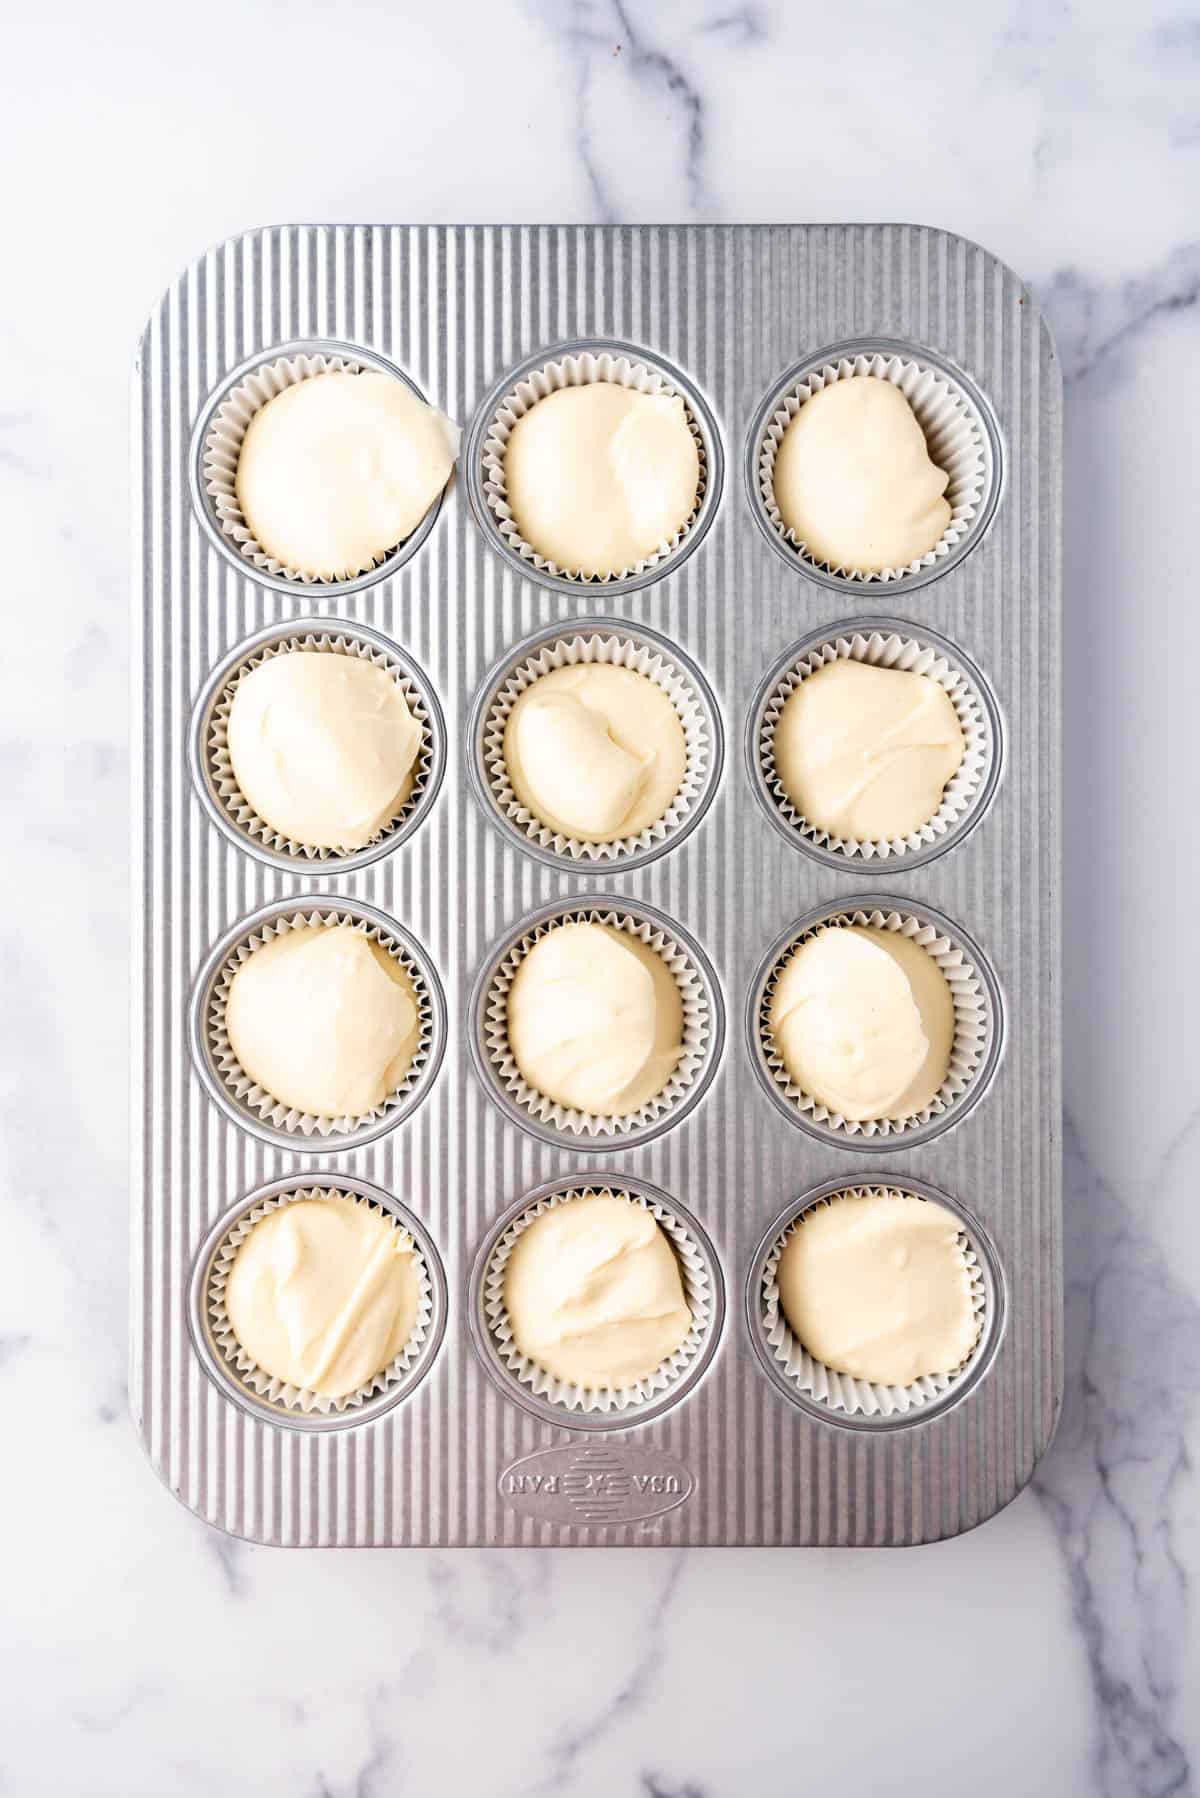 Adding cheesecake batter to muffin pans.